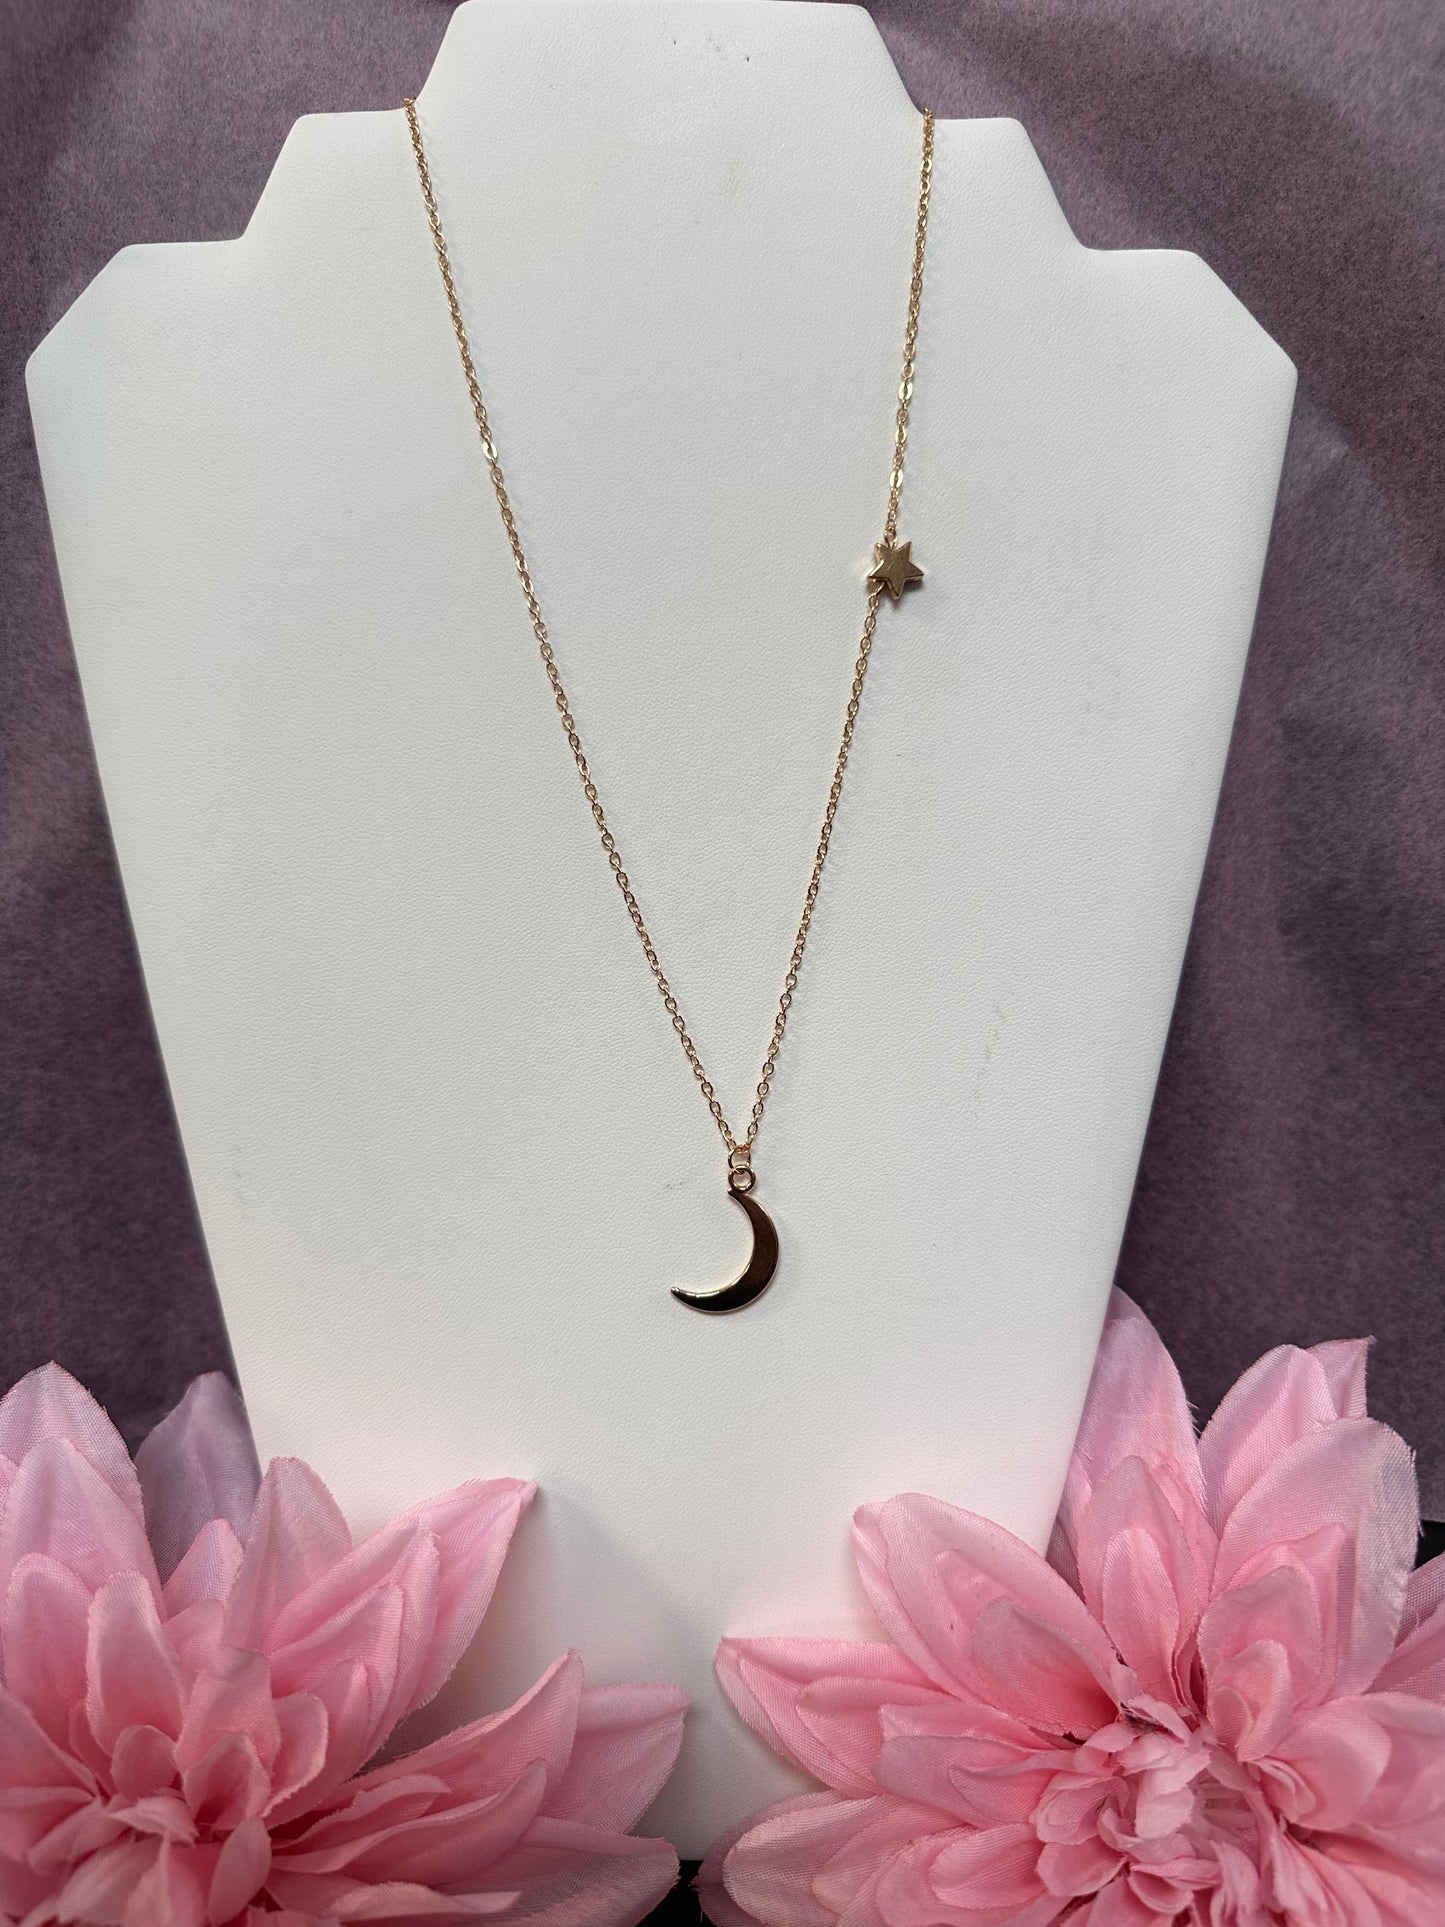 The Moon & Star Necklace